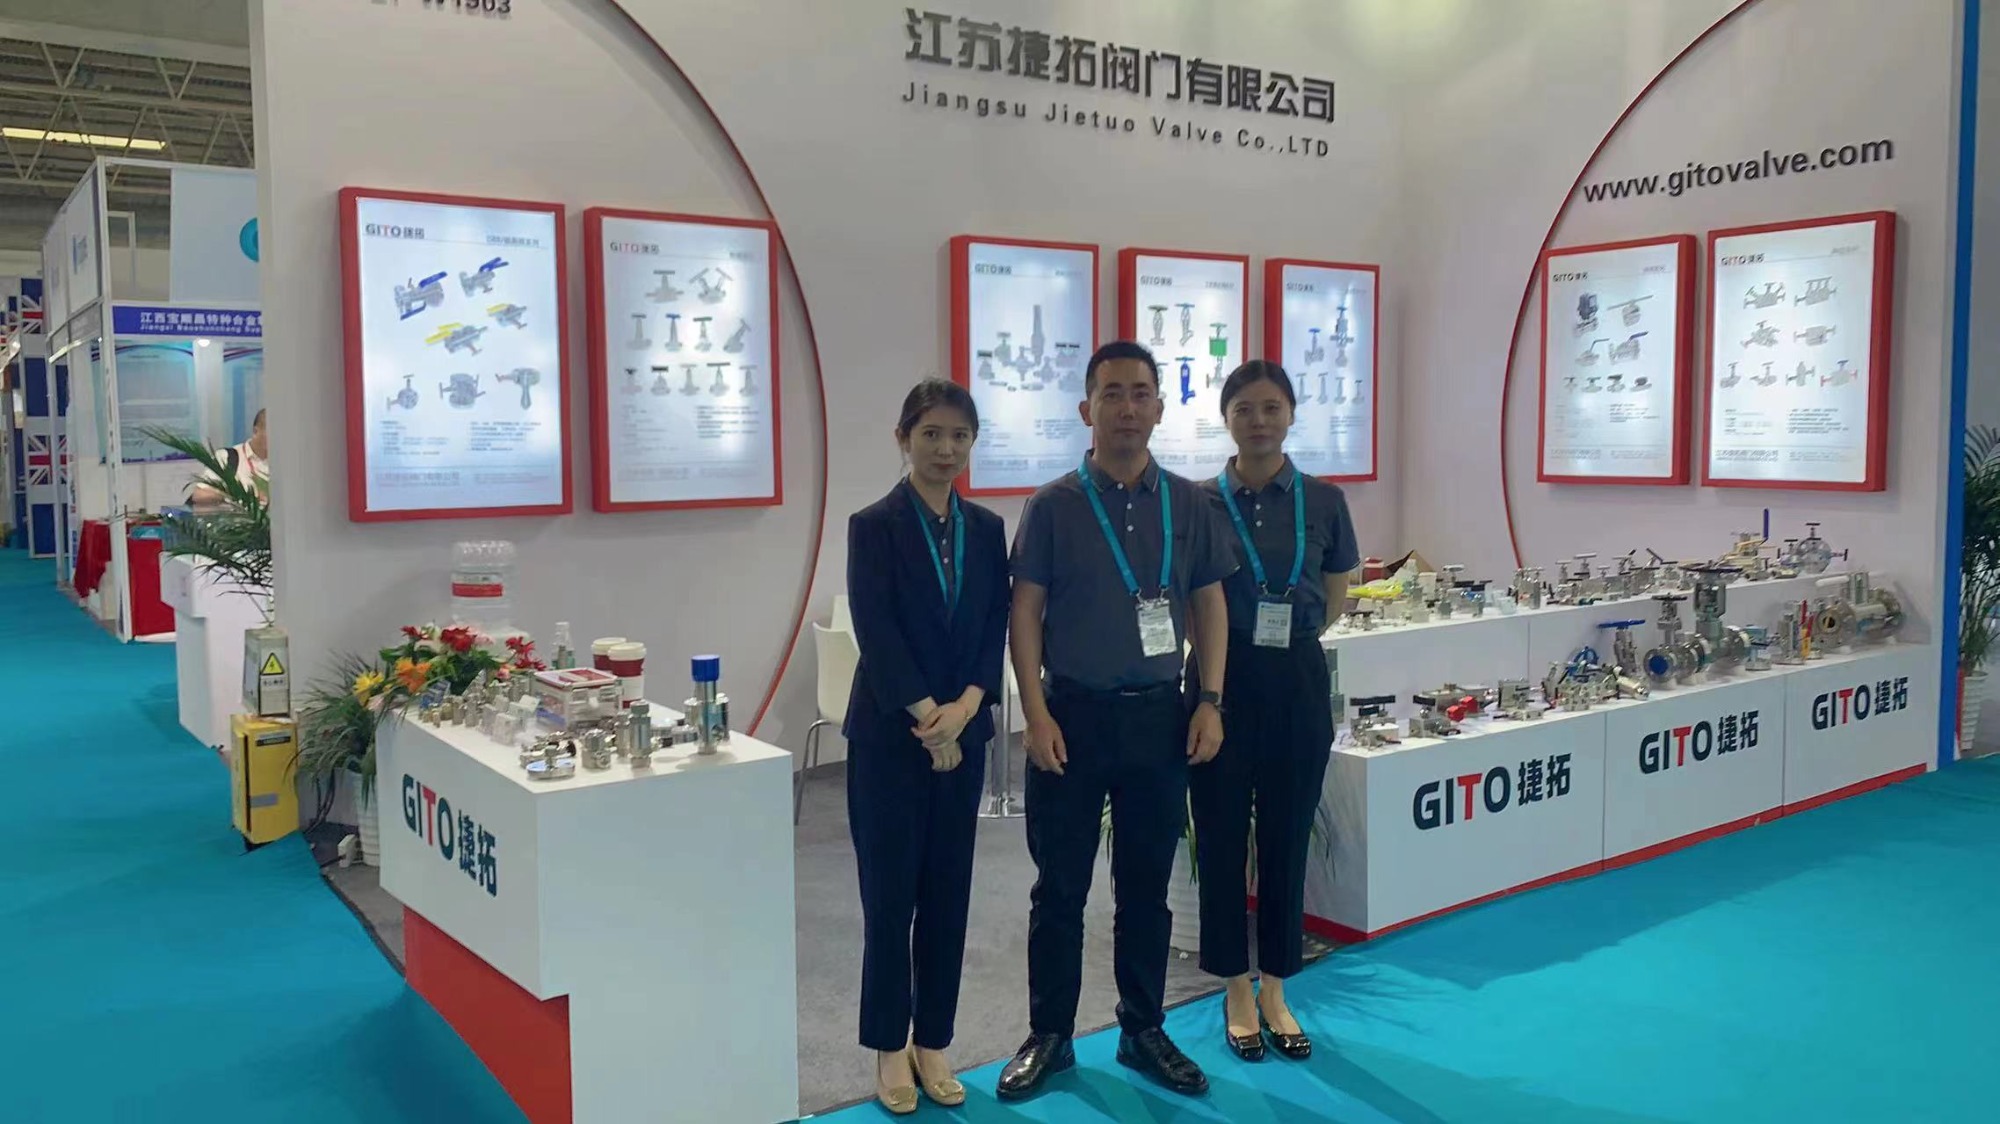 The 23rd China International Petroleum & Petrochemical Technology and Equipment Exhibition